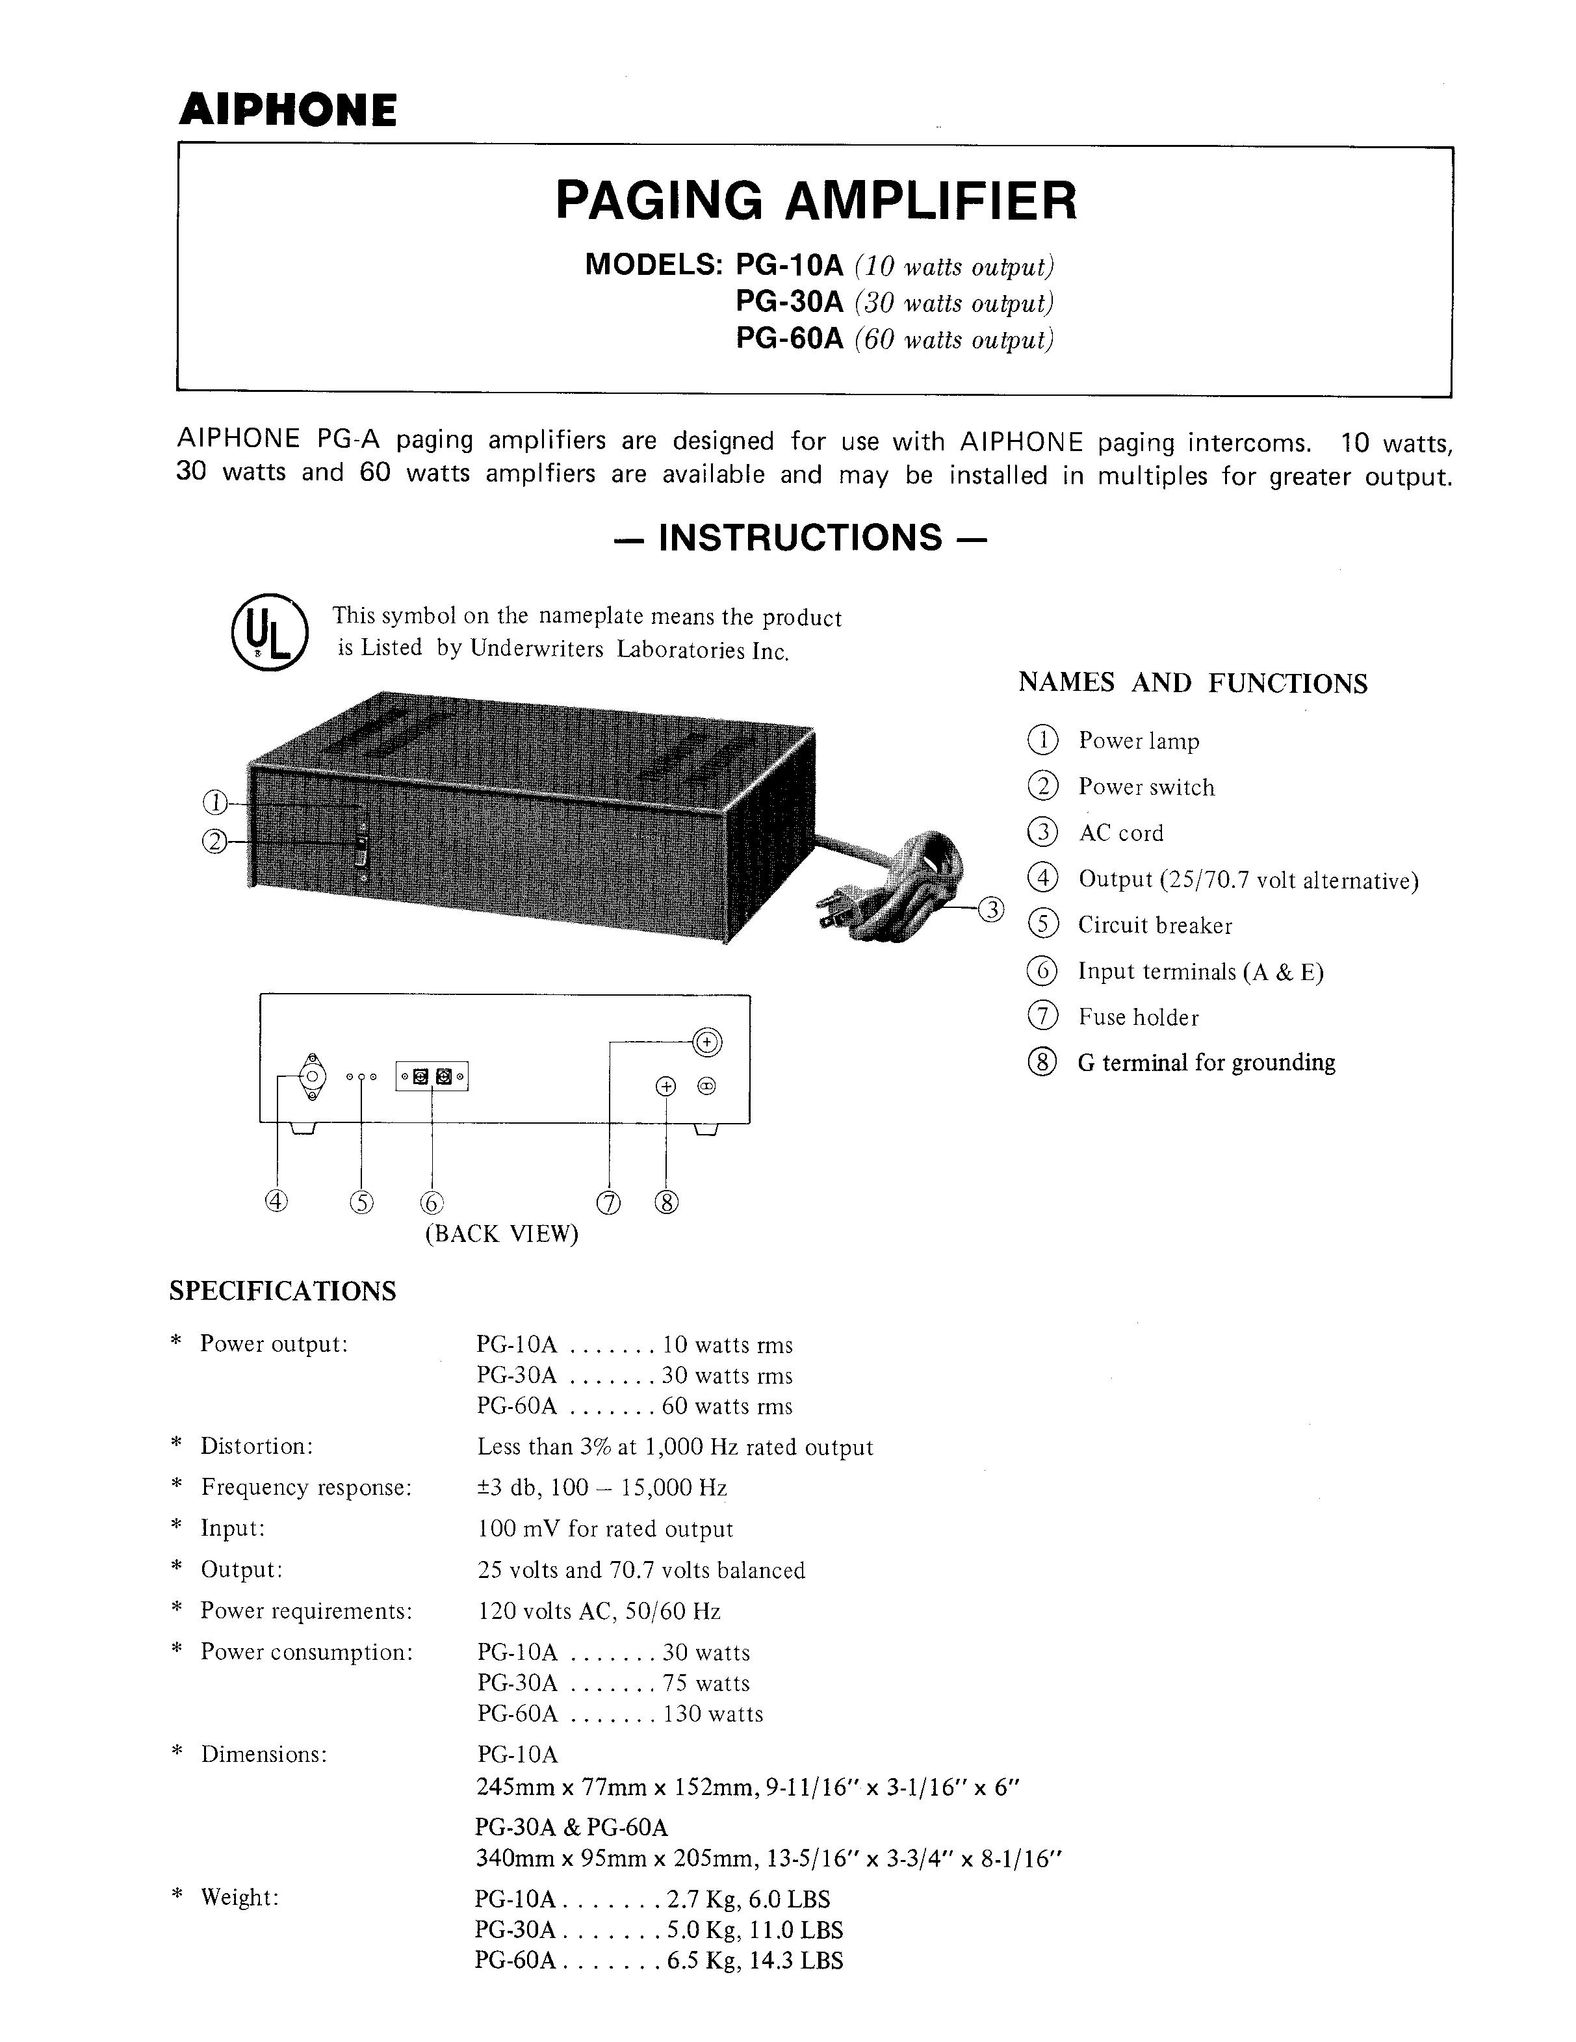 Aiphone PG-60A Amplified Phone User Manual